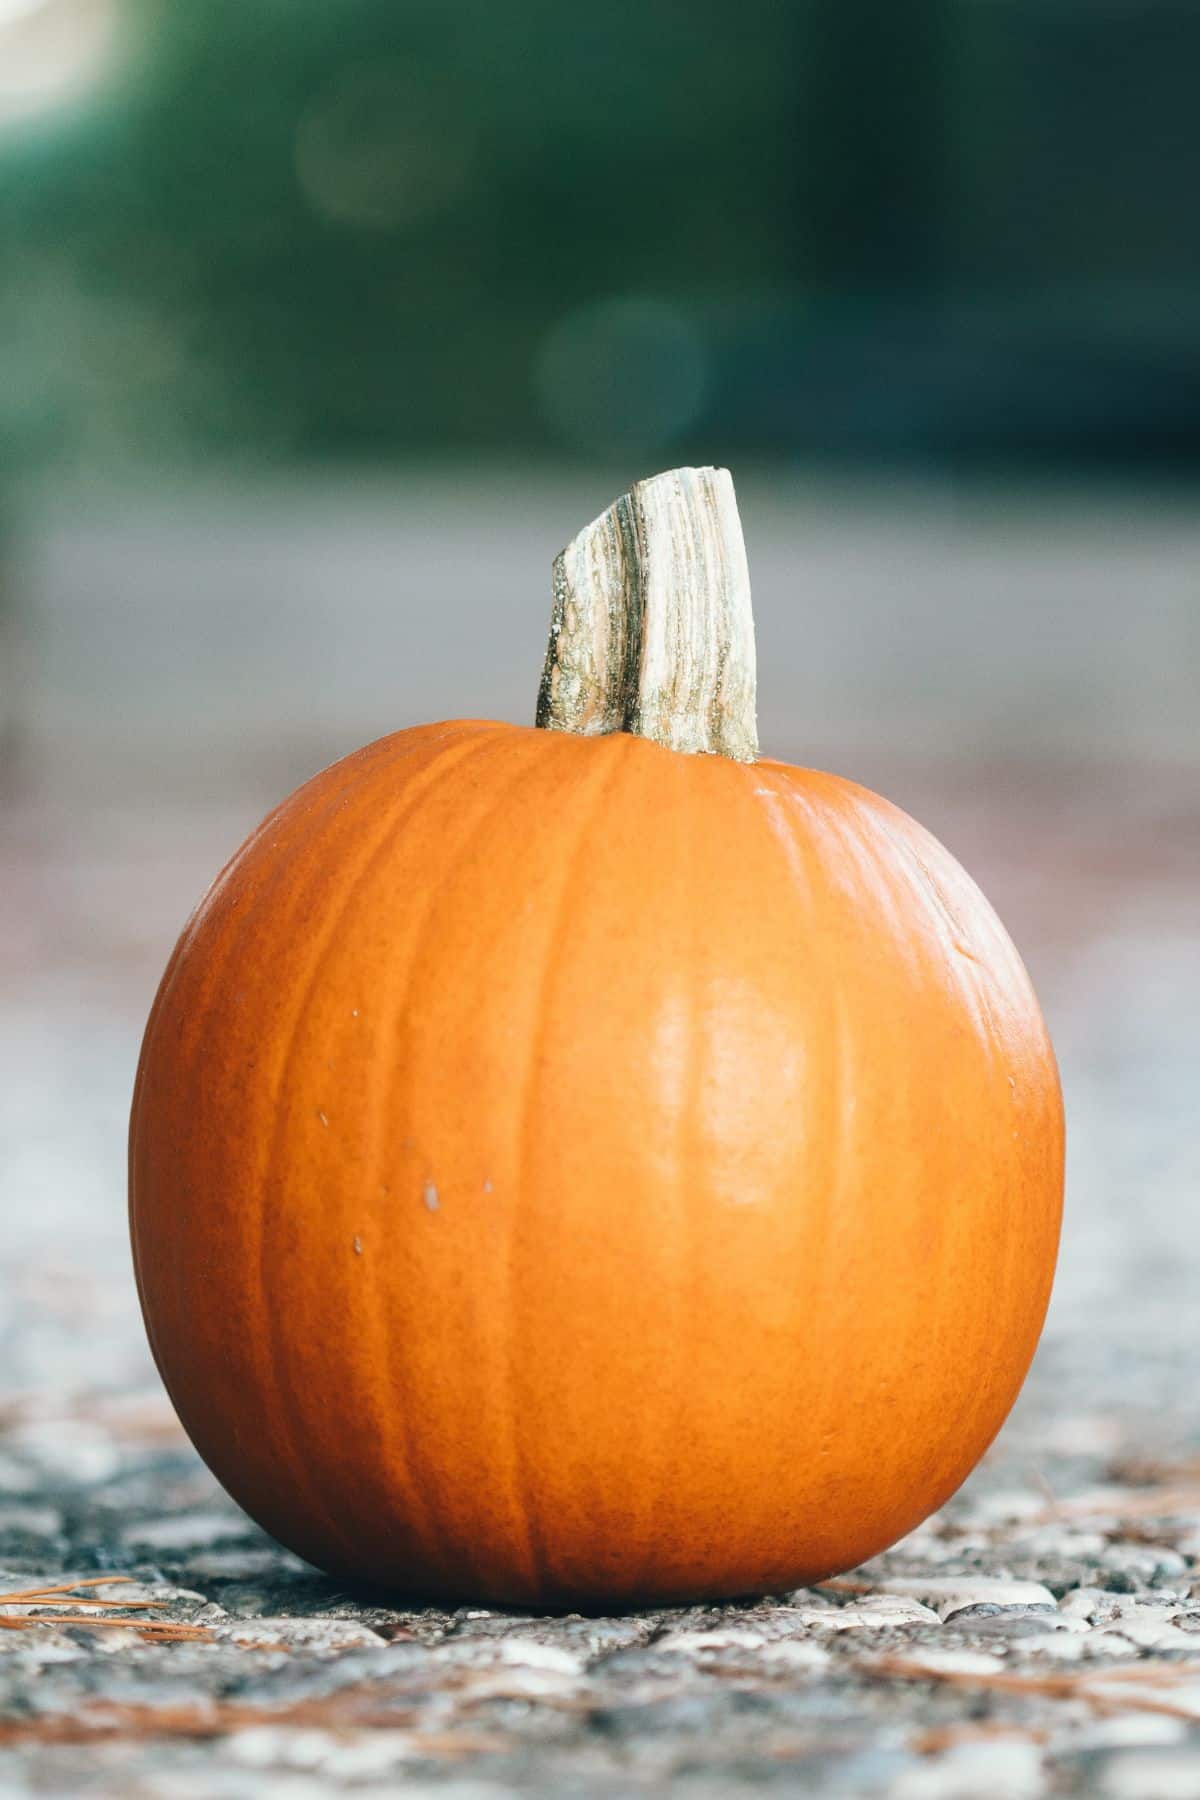 A small pumpkin sits on a concrete surface, indicating its ripeness.